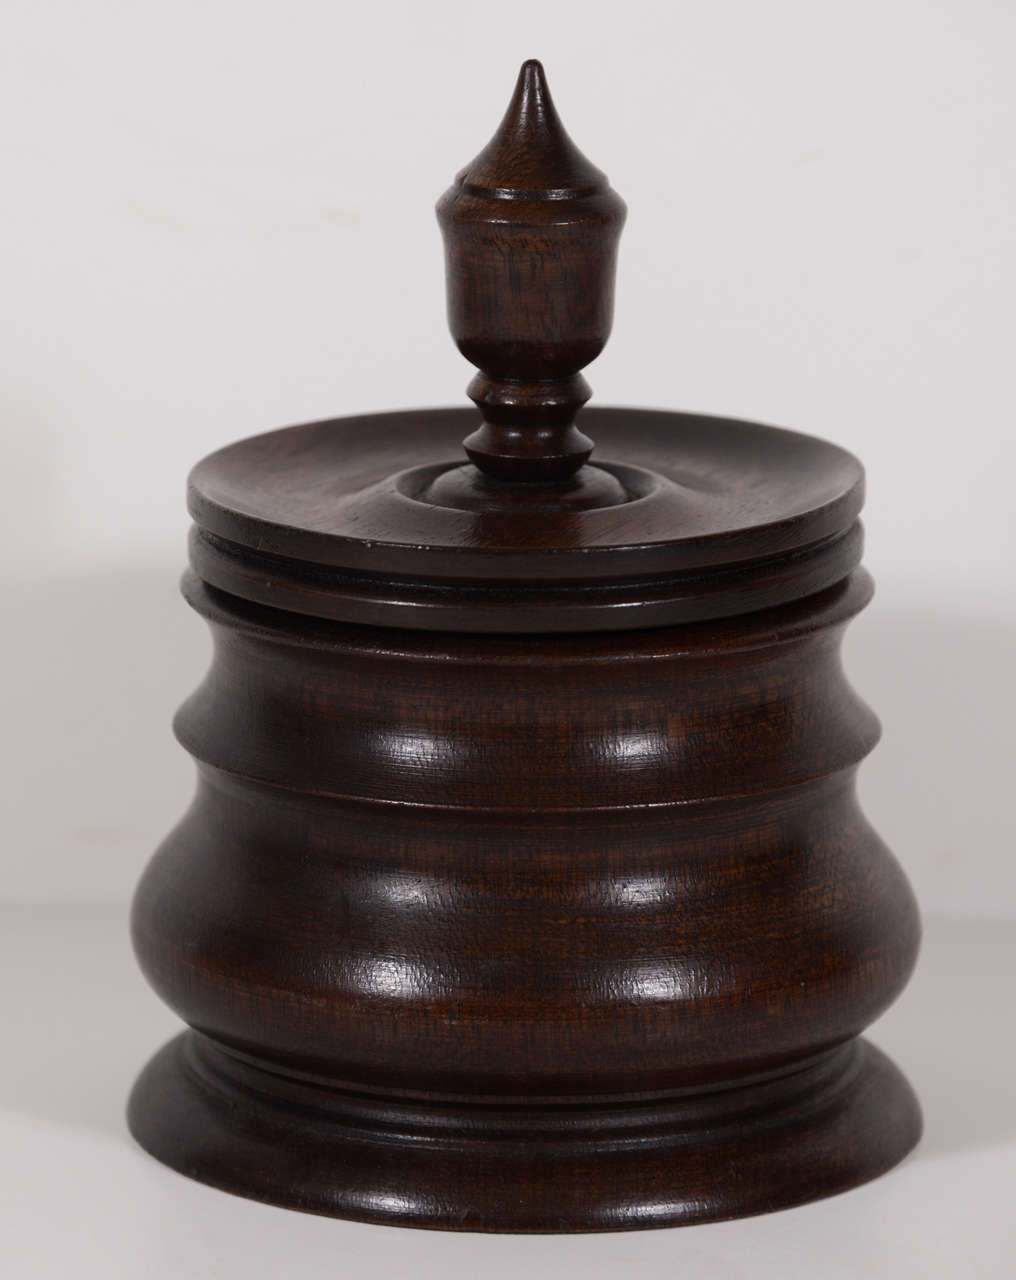 Wooden Dutch tobacco jar circa 1800s.  Similar to the English's love for tea, the Dutch admired the product grown in their colonies, tobacco. The English were well known for their beautiful and decorative tea caddies and the Dutch were known for